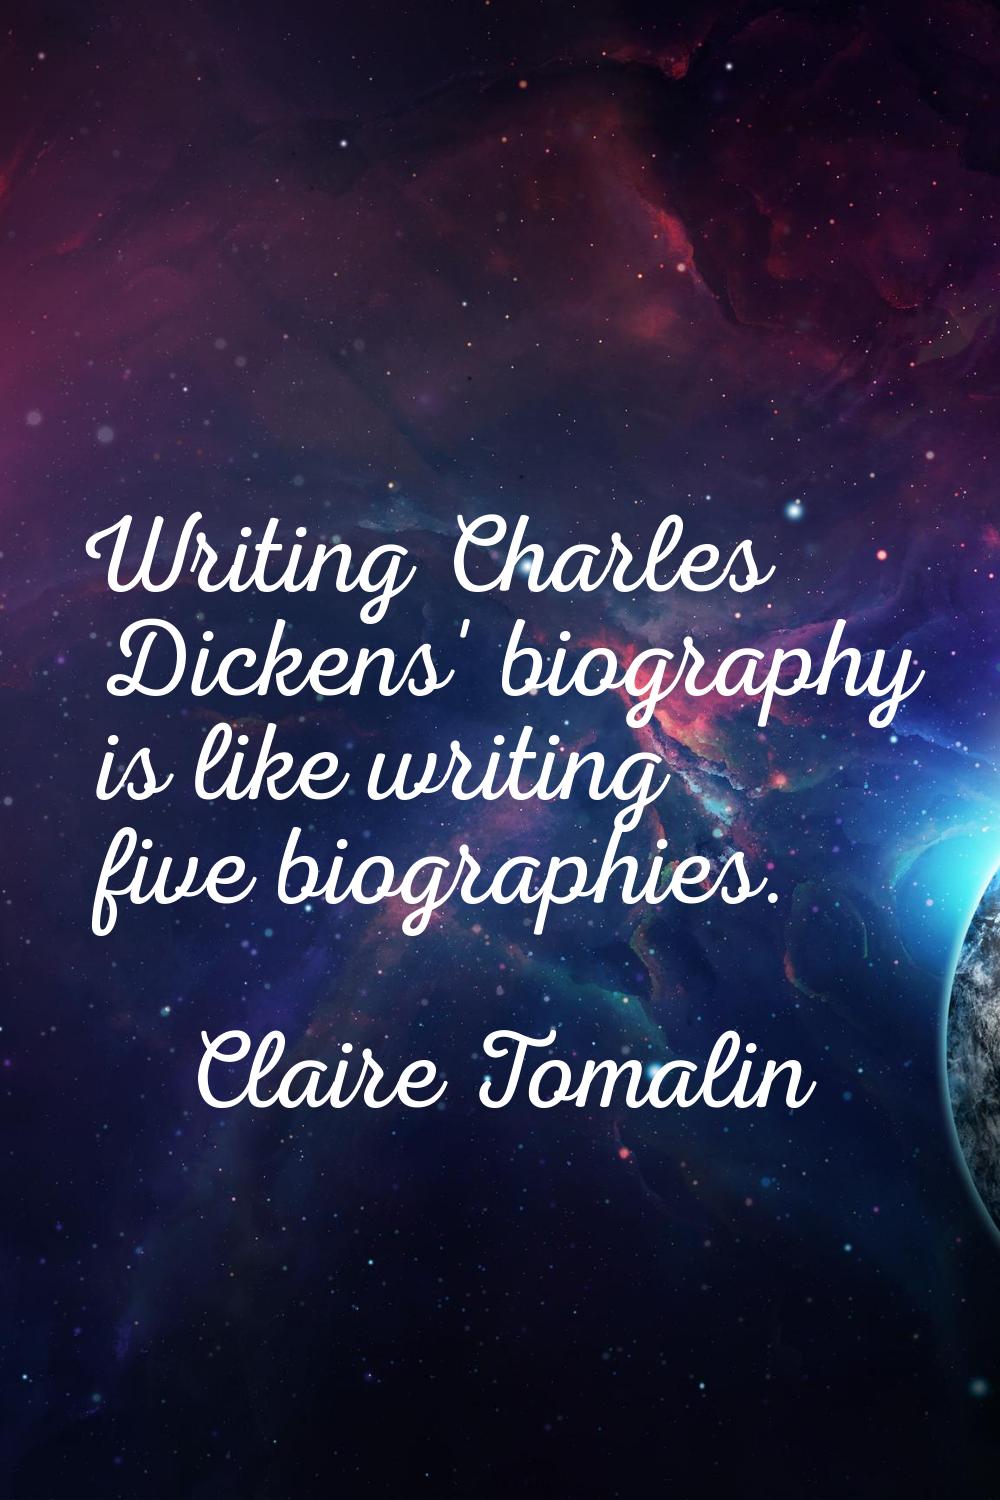 Writing Charles Dickens' biography is like writing five biographies.